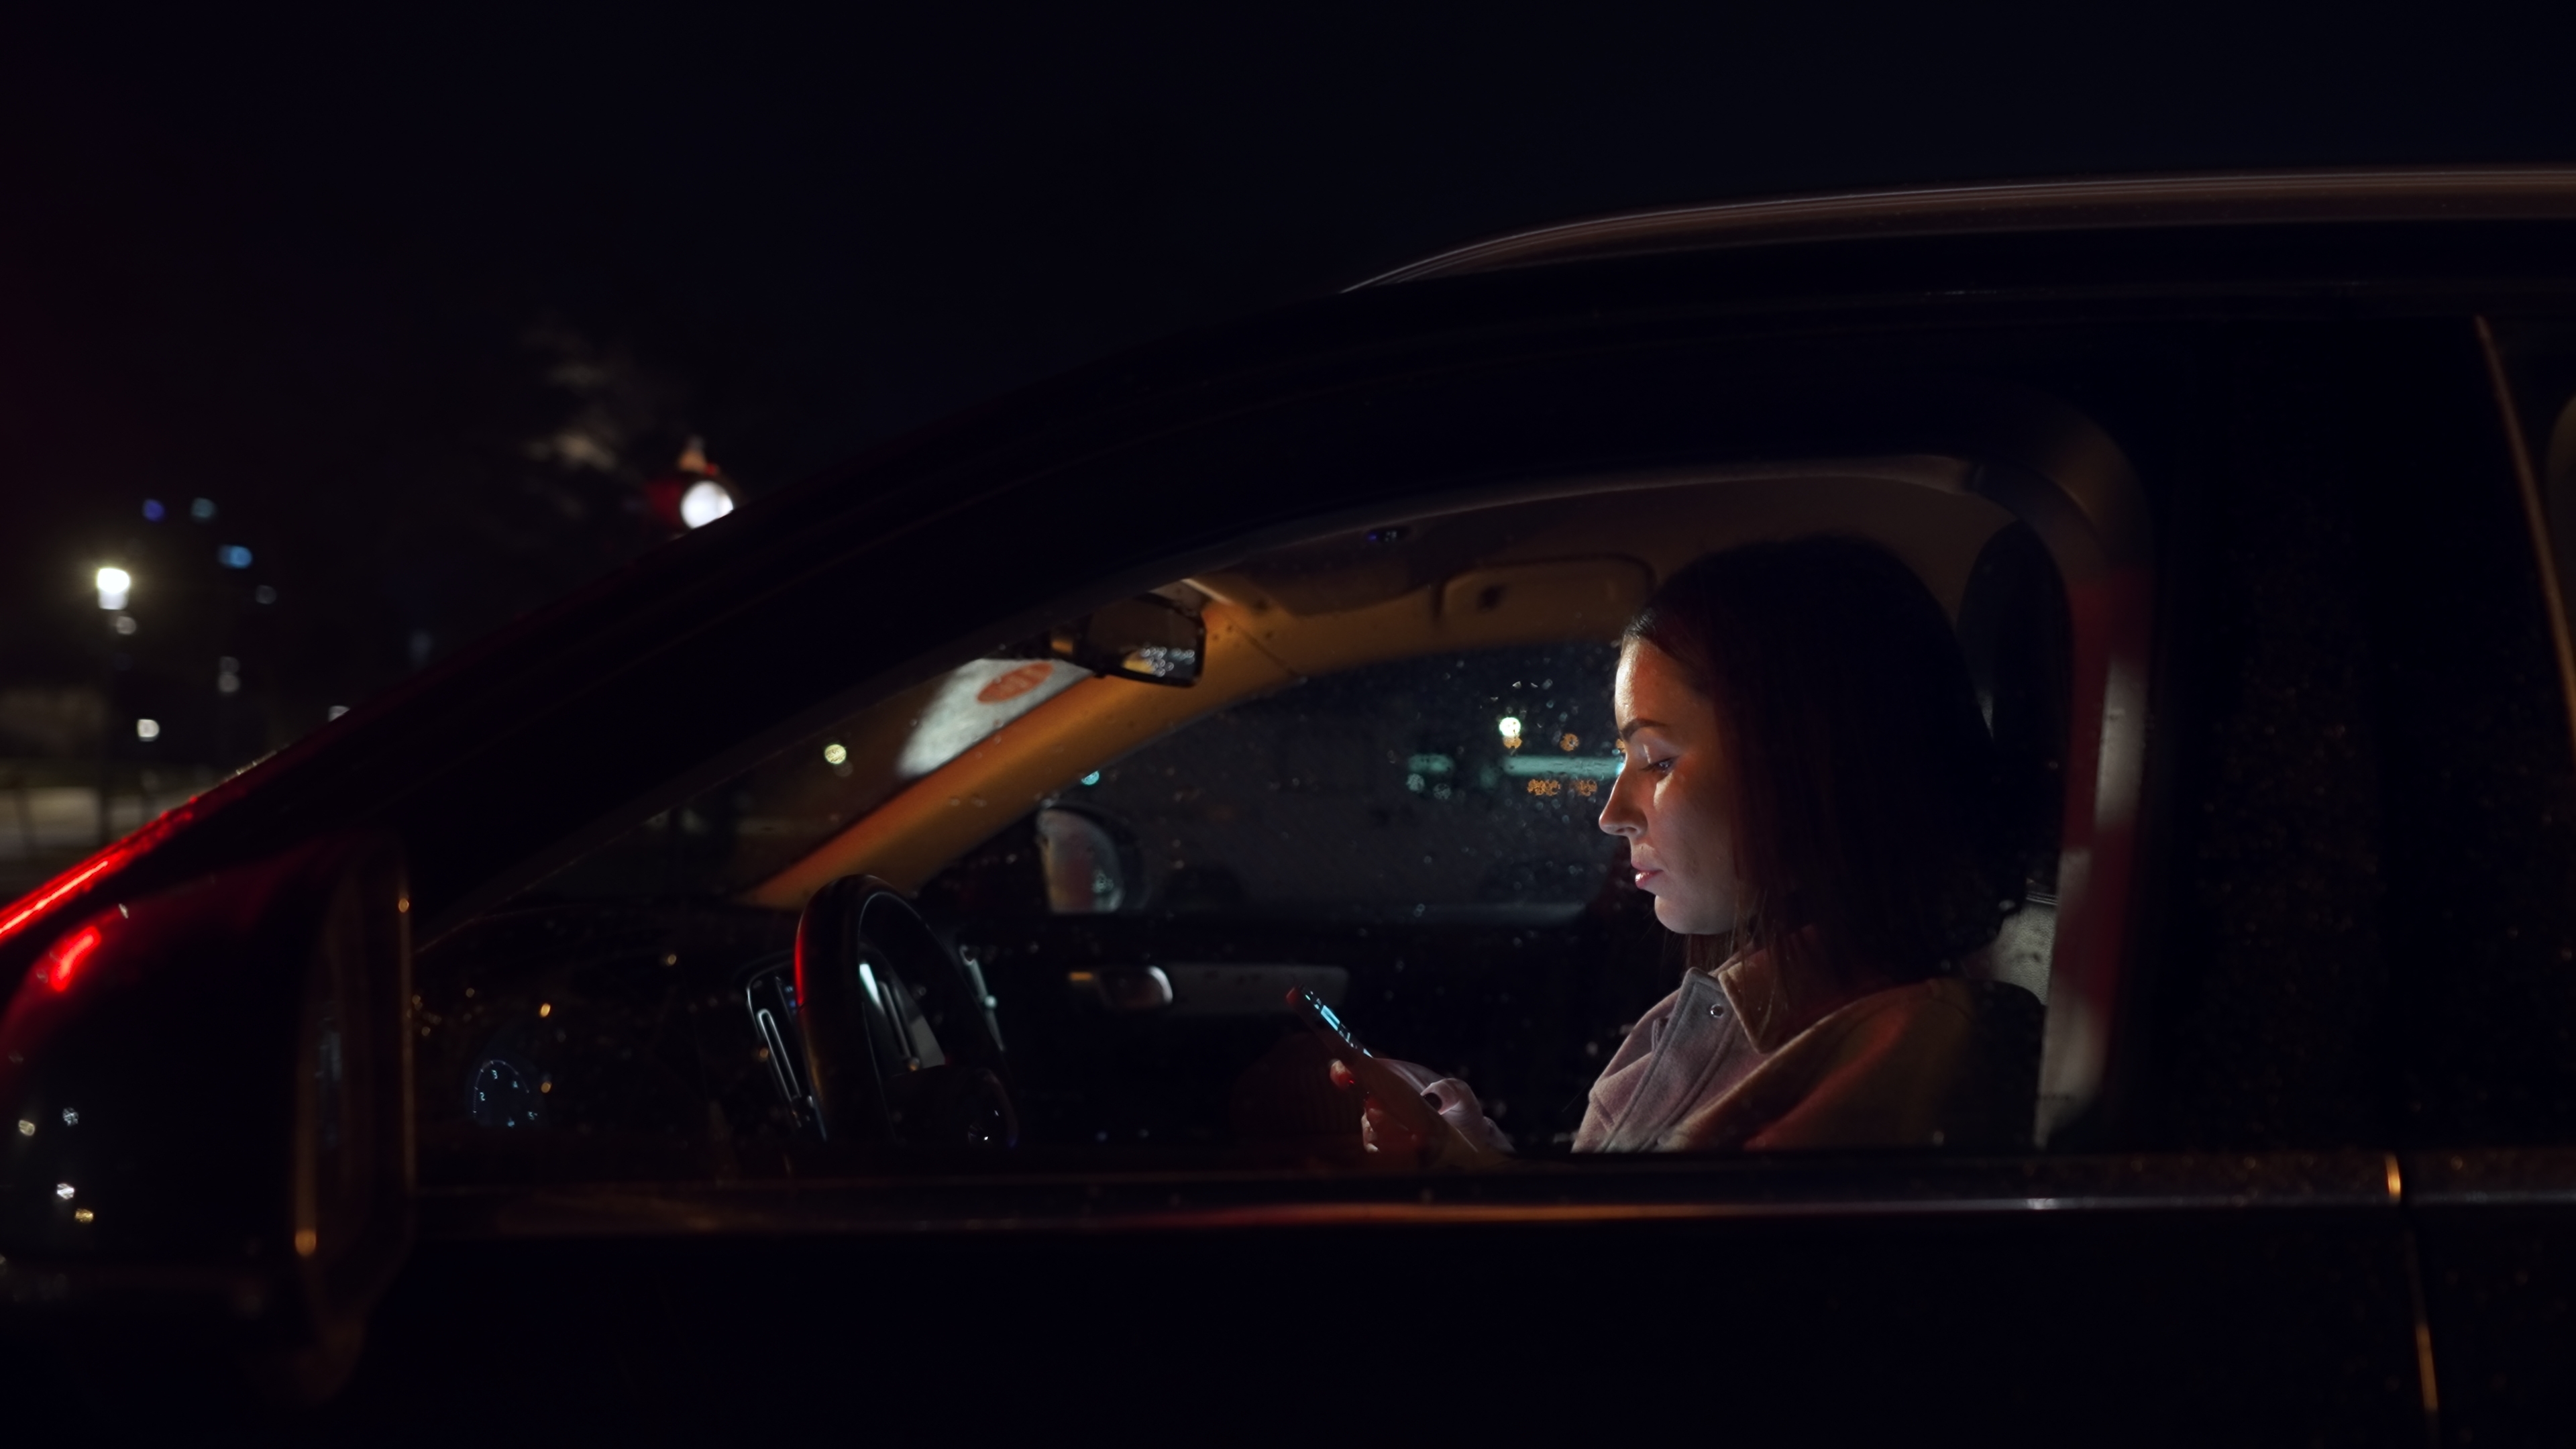 Woman using smartphone in a car at night. | Source: Shutterstock